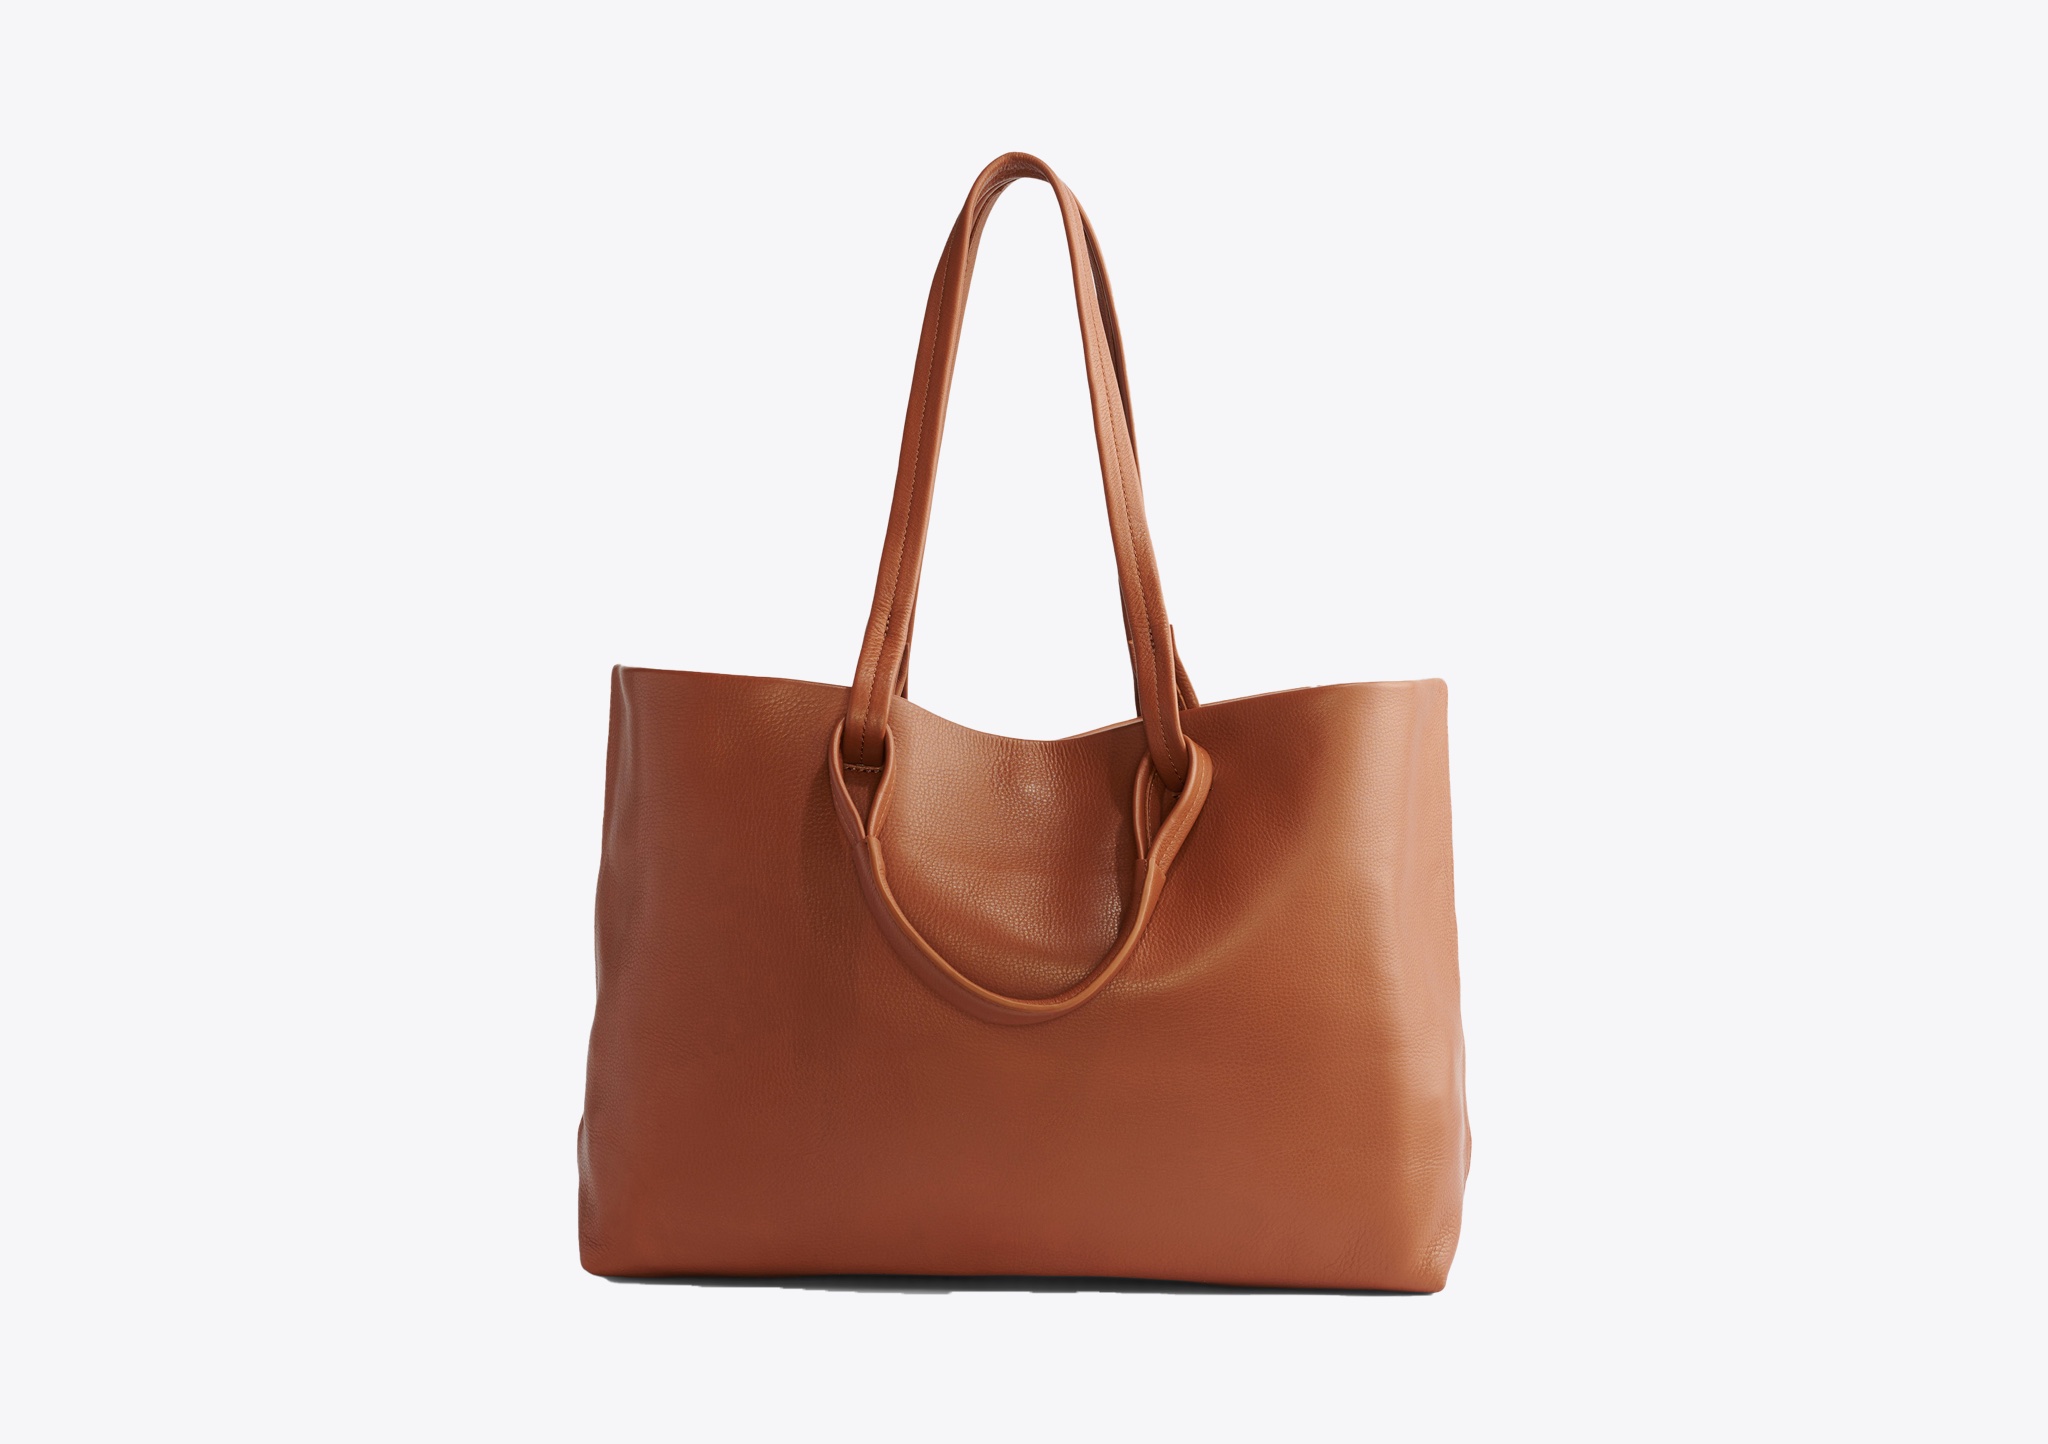 Nisolo Camila Everyday Tote Caramel - Every Nisolo product is built on the foundation of comfort, function, and design. 